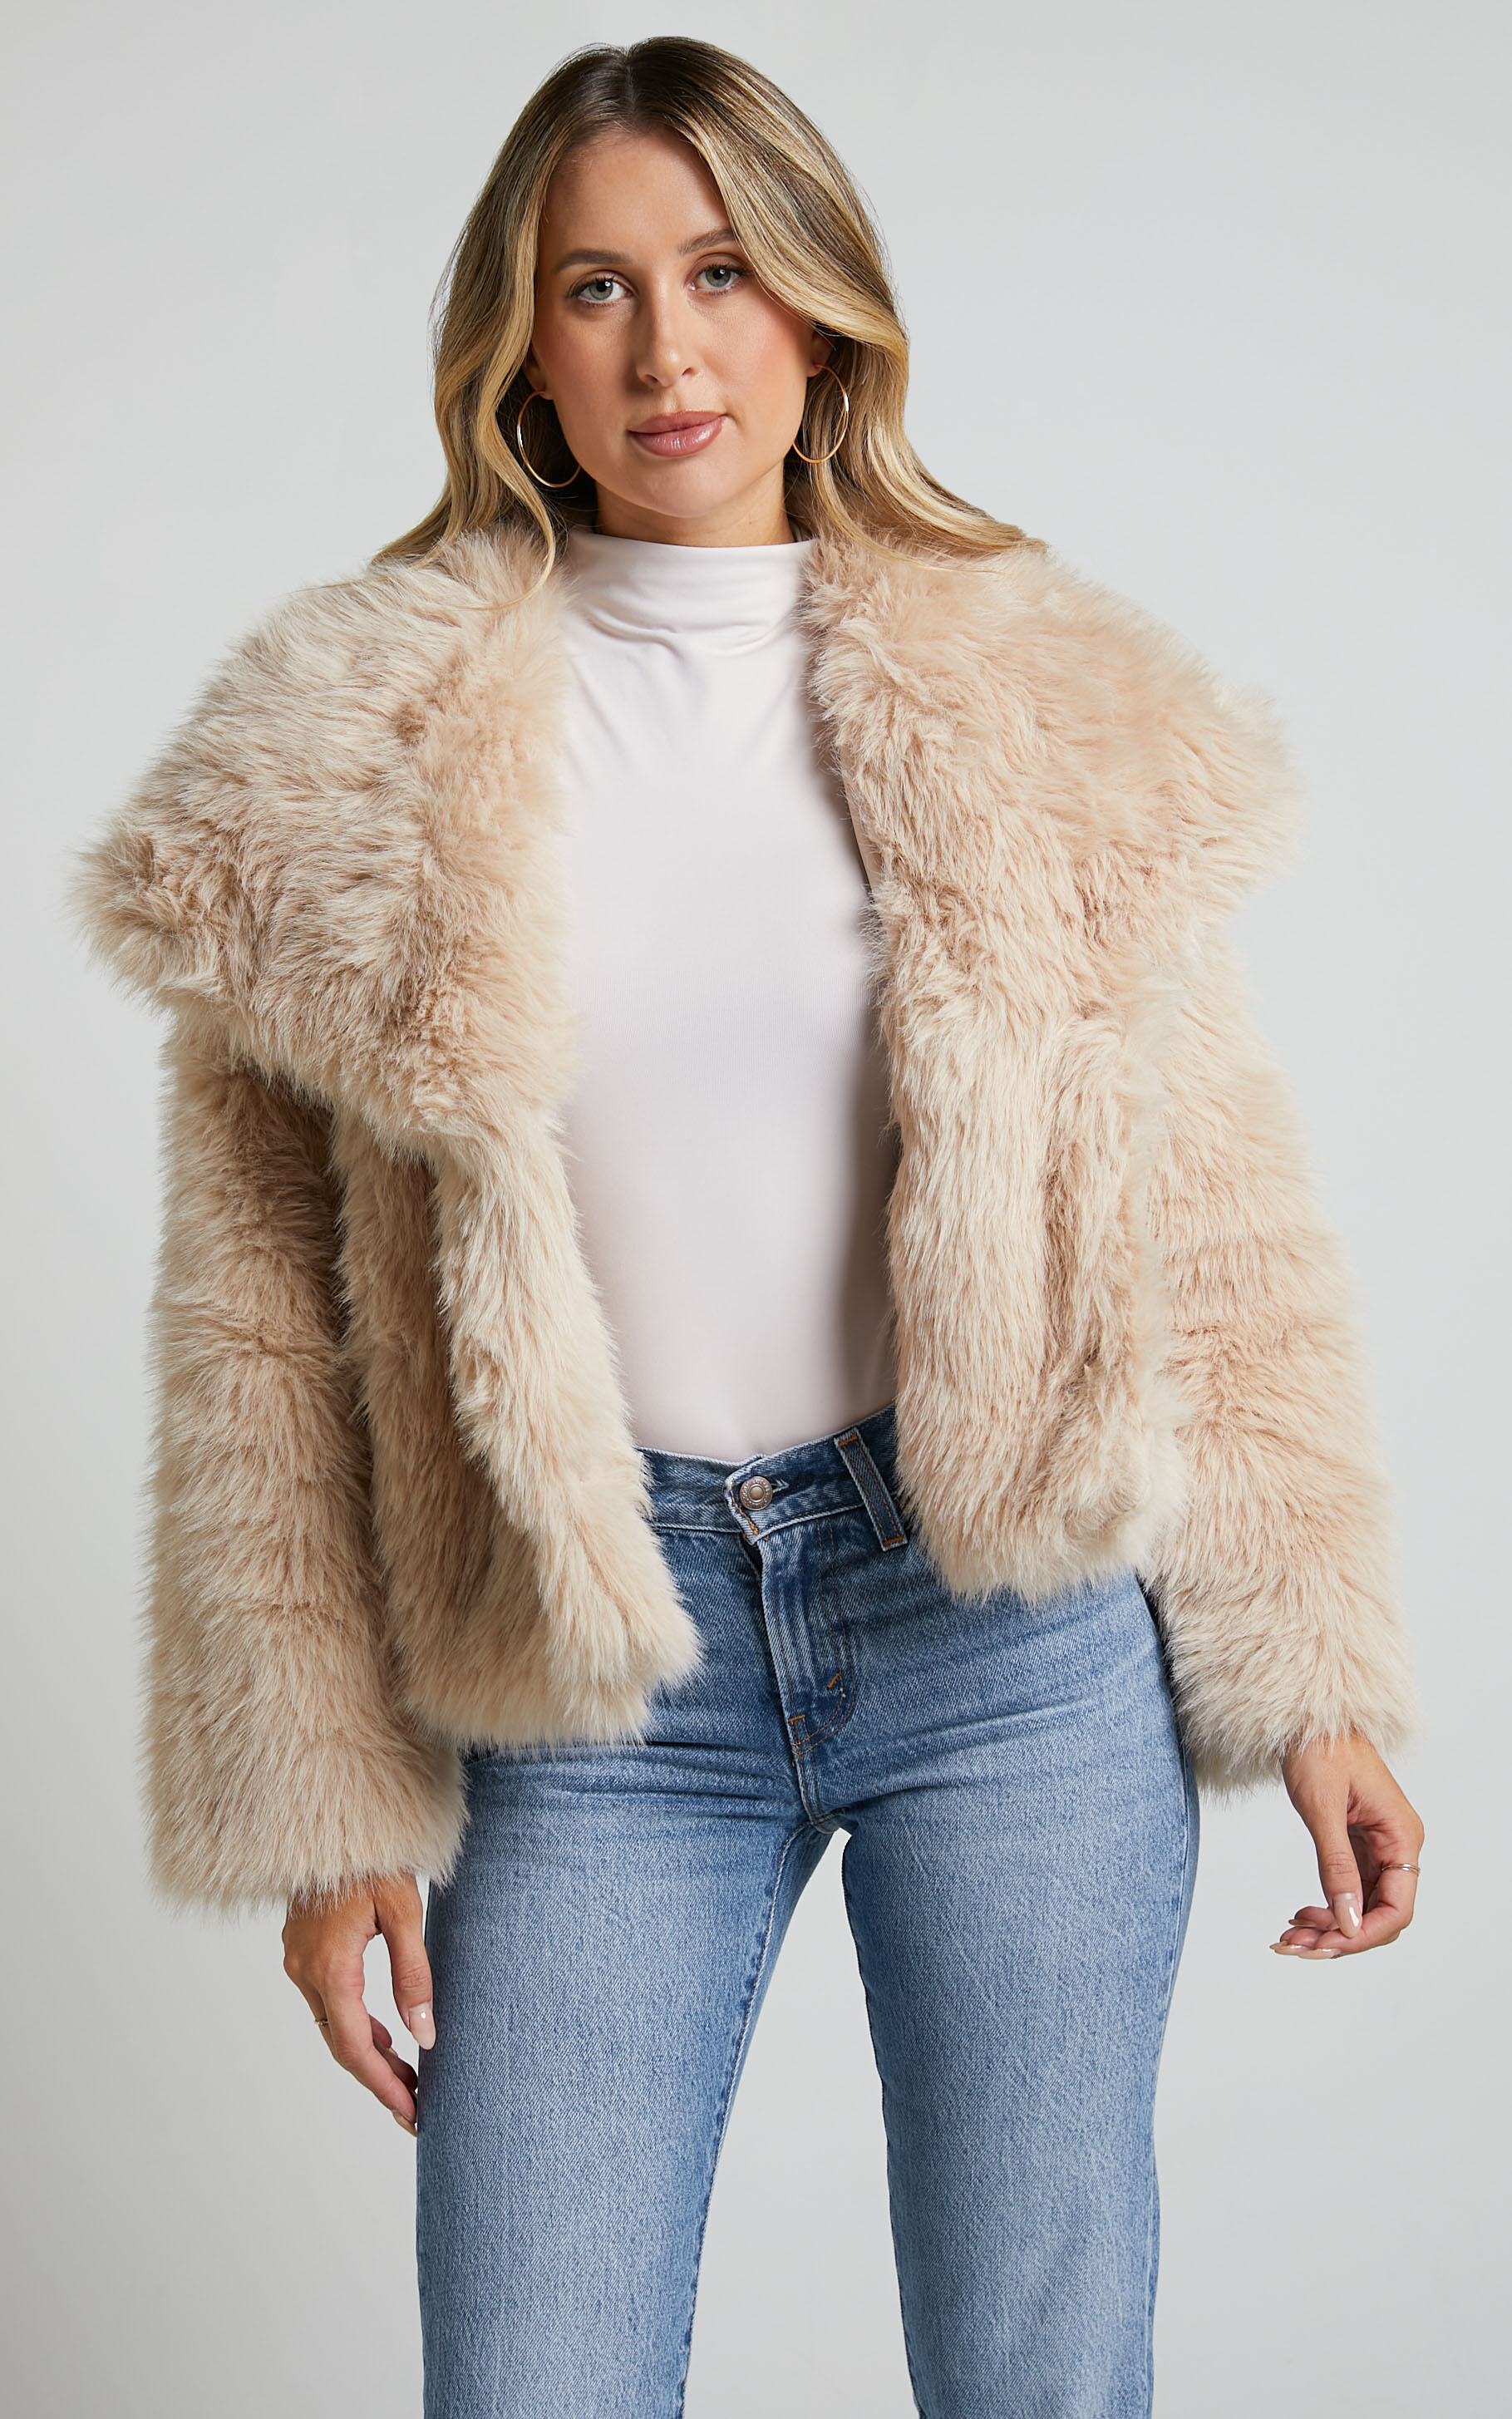 Ophilia Faux Fur Open Collar Jacket in Beige - XS, NEU1, super-hi-res image number null